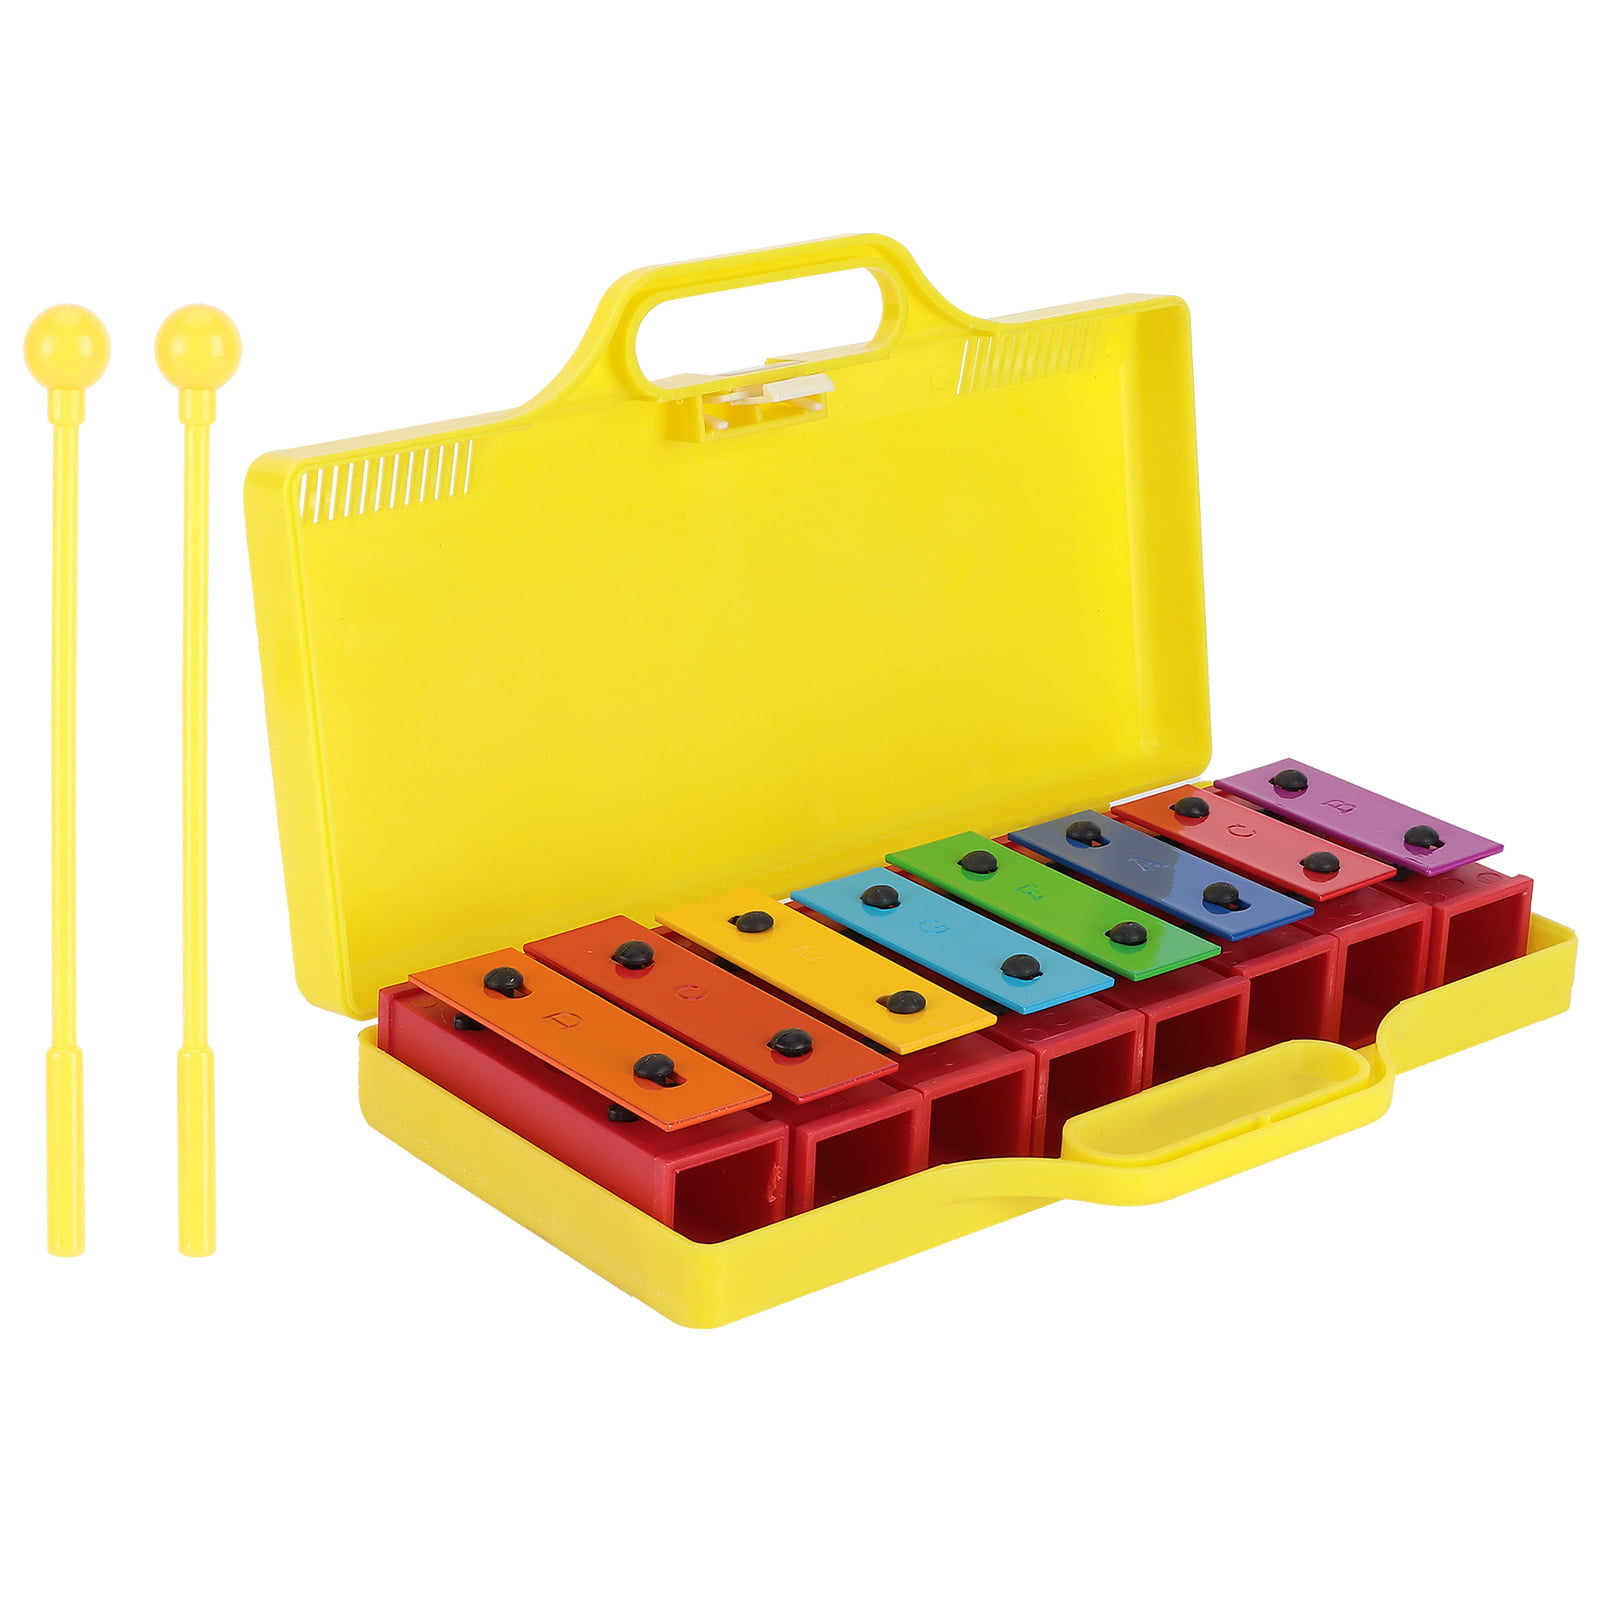 Kids Baby Xylophone Music Instrument Toys Music Maker No Battery needed 